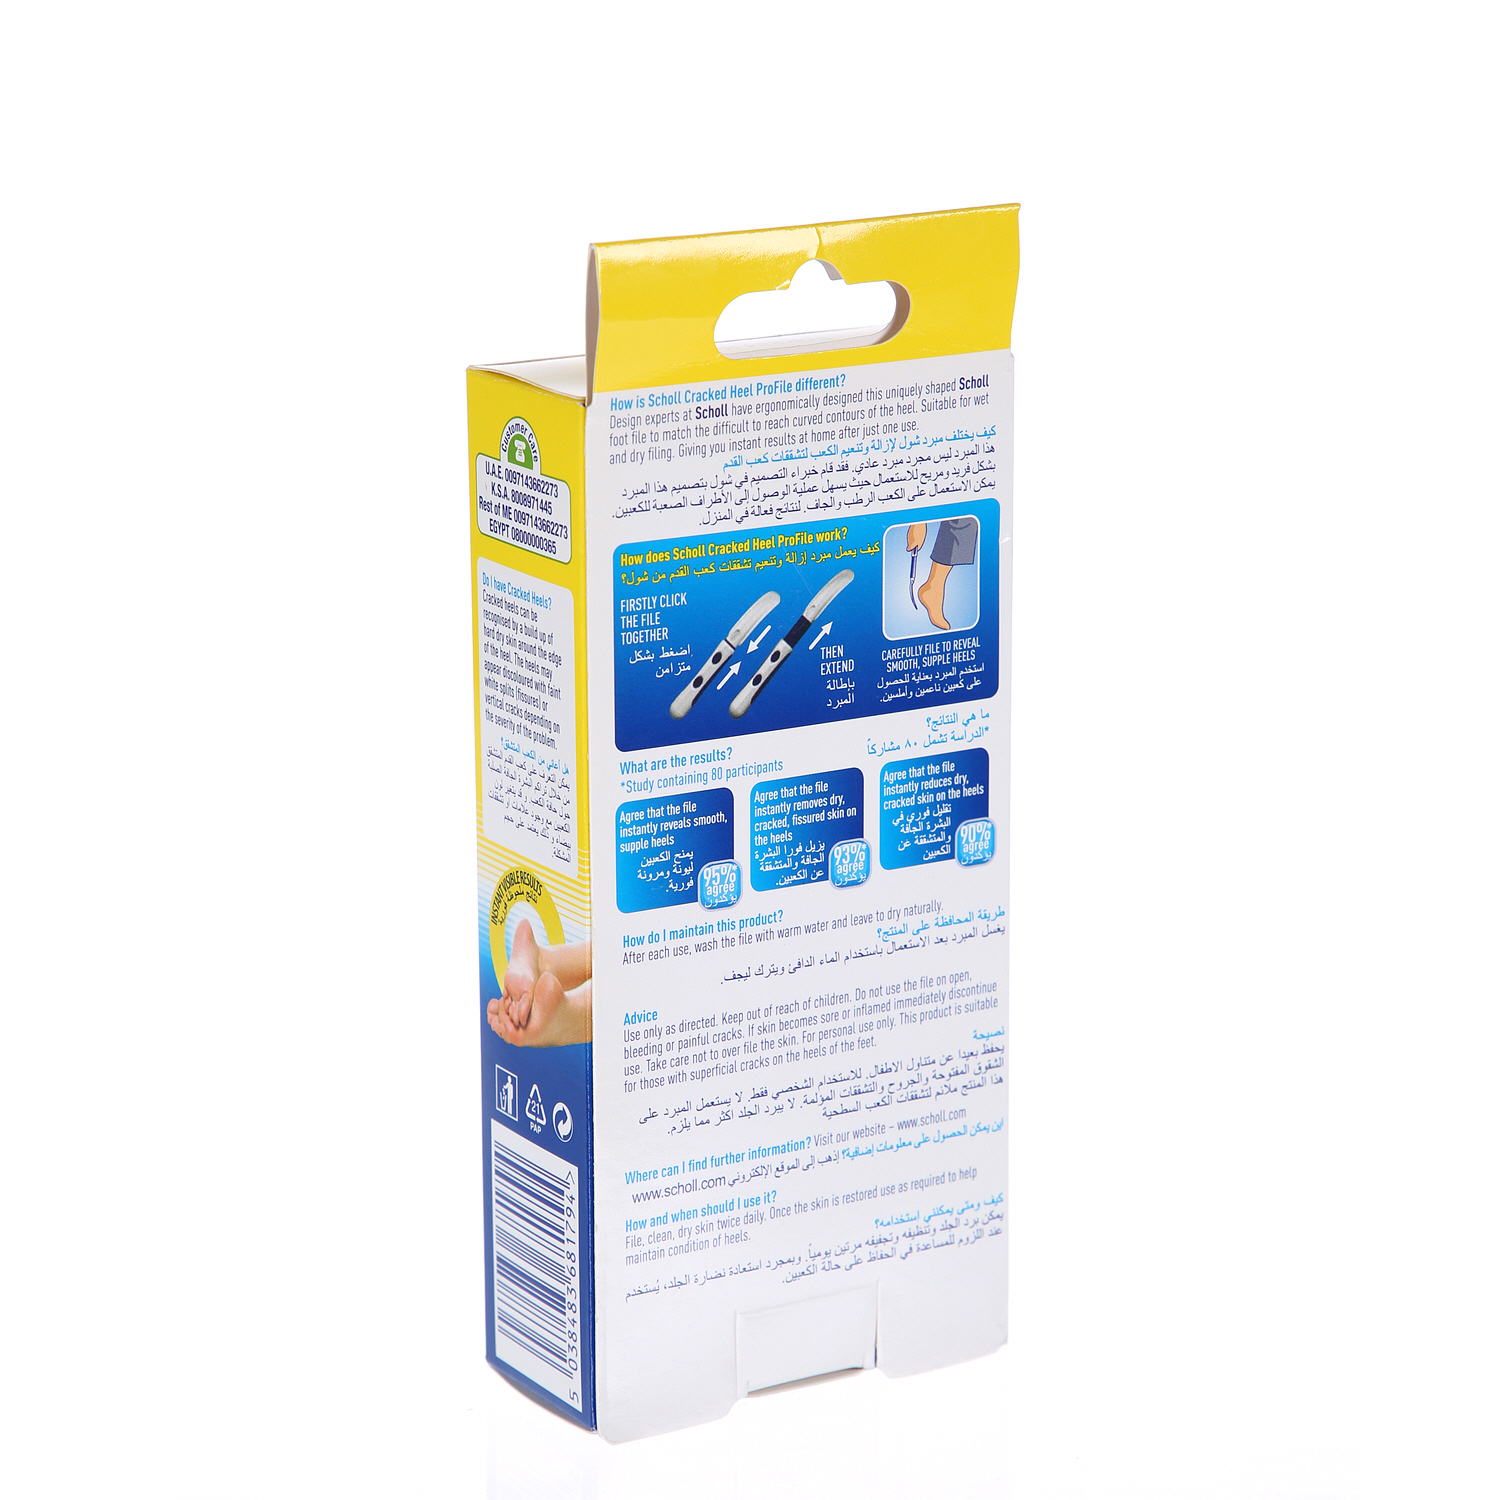 Scholl Cracked Heel Smooth  Pro-File